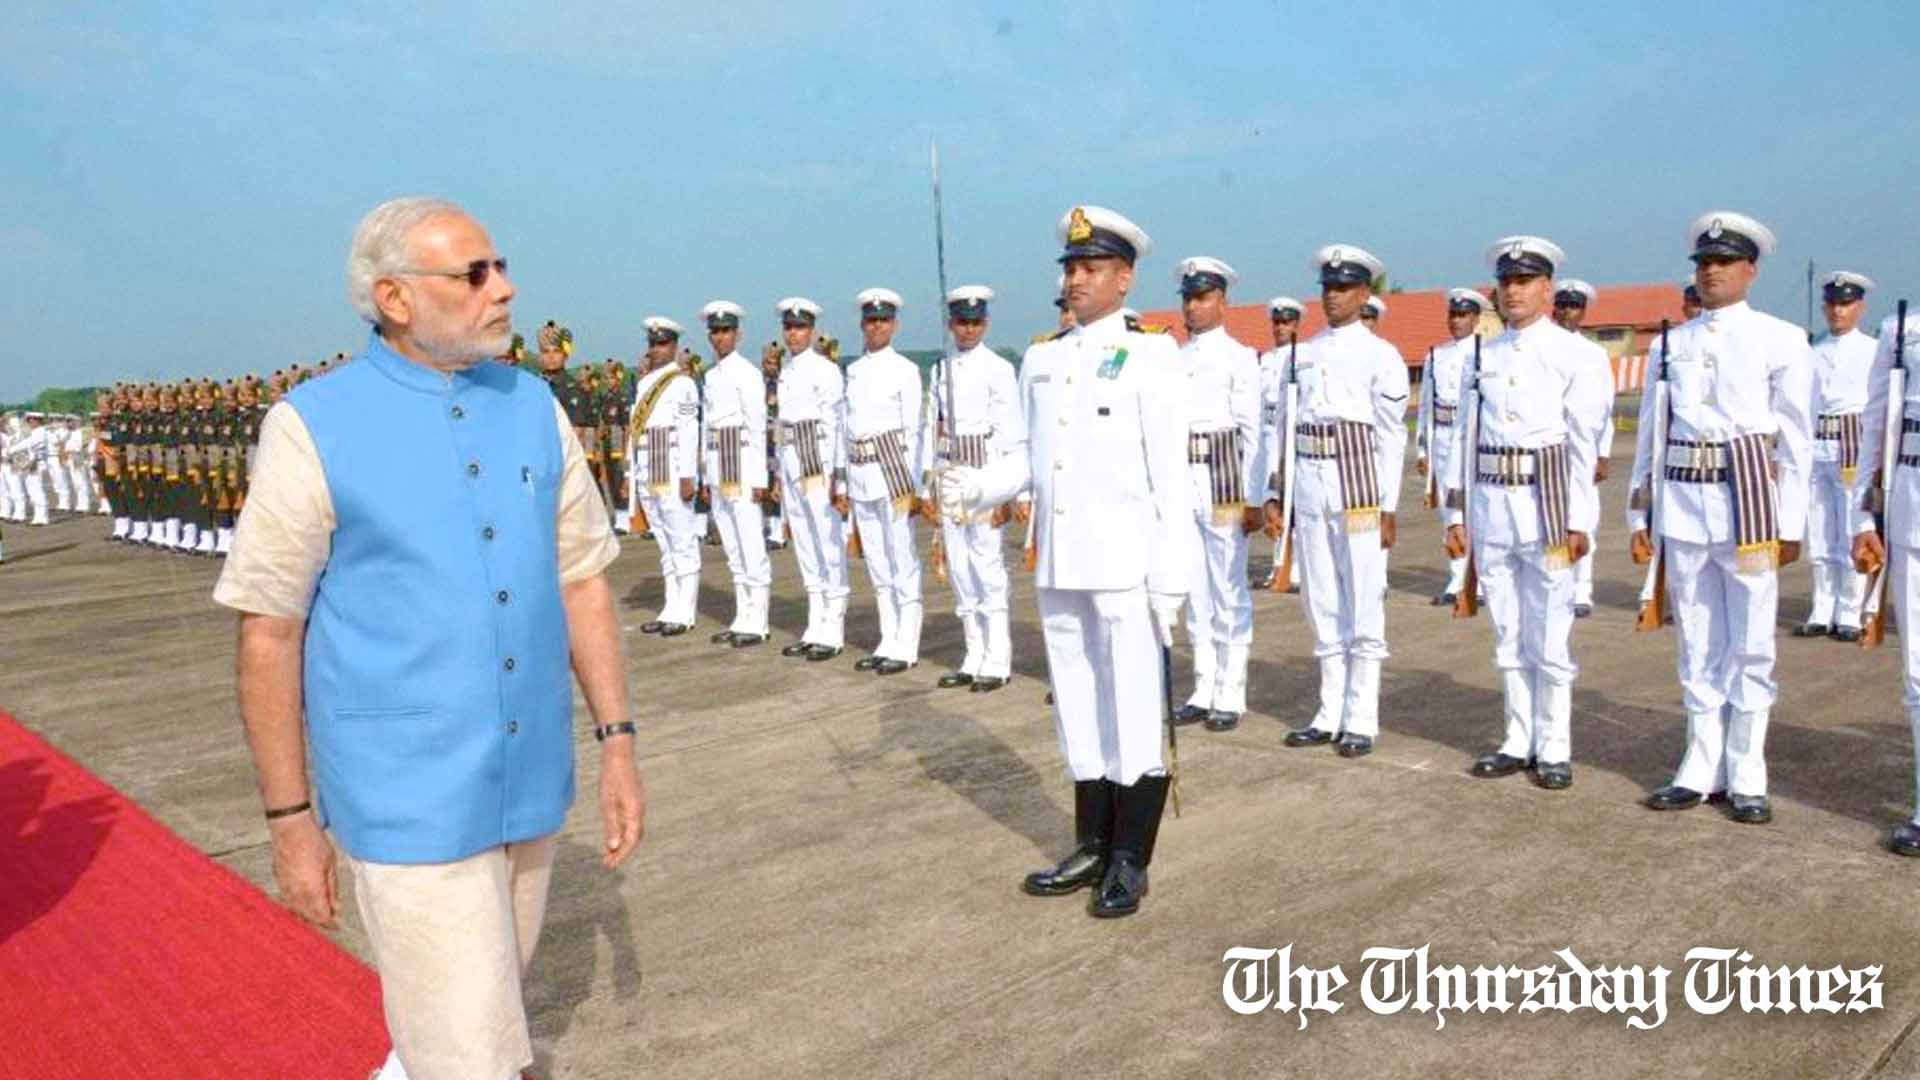 A file photo is shown of Bharati Prime Minister Narendra Modi commemorating Navy Day in 2017.